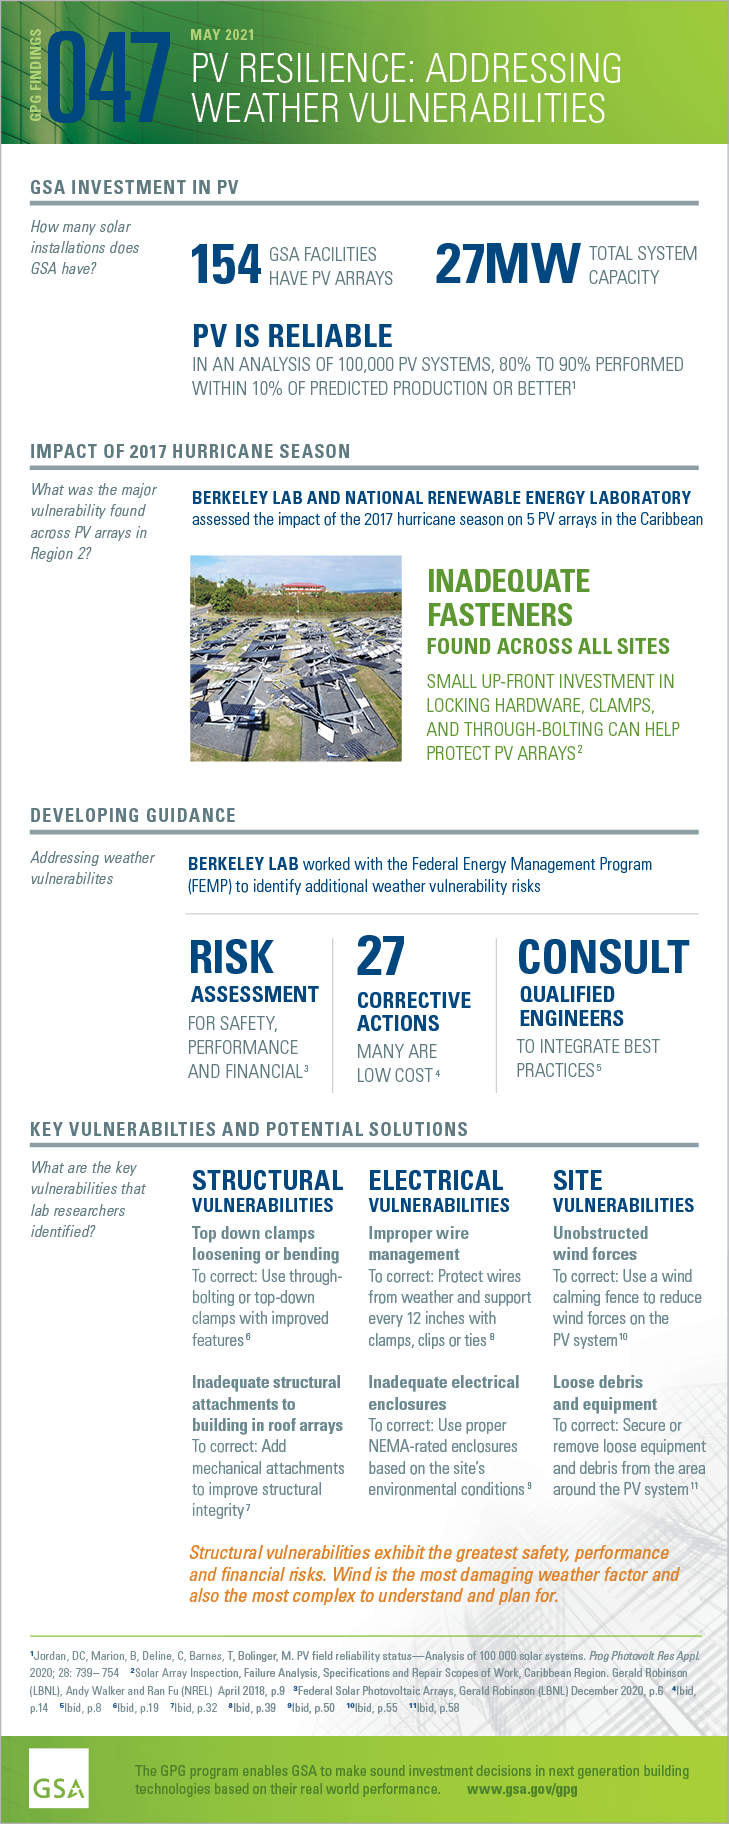 Download the PDF version of the full-sized infographic for GPG047 PV Resilience.